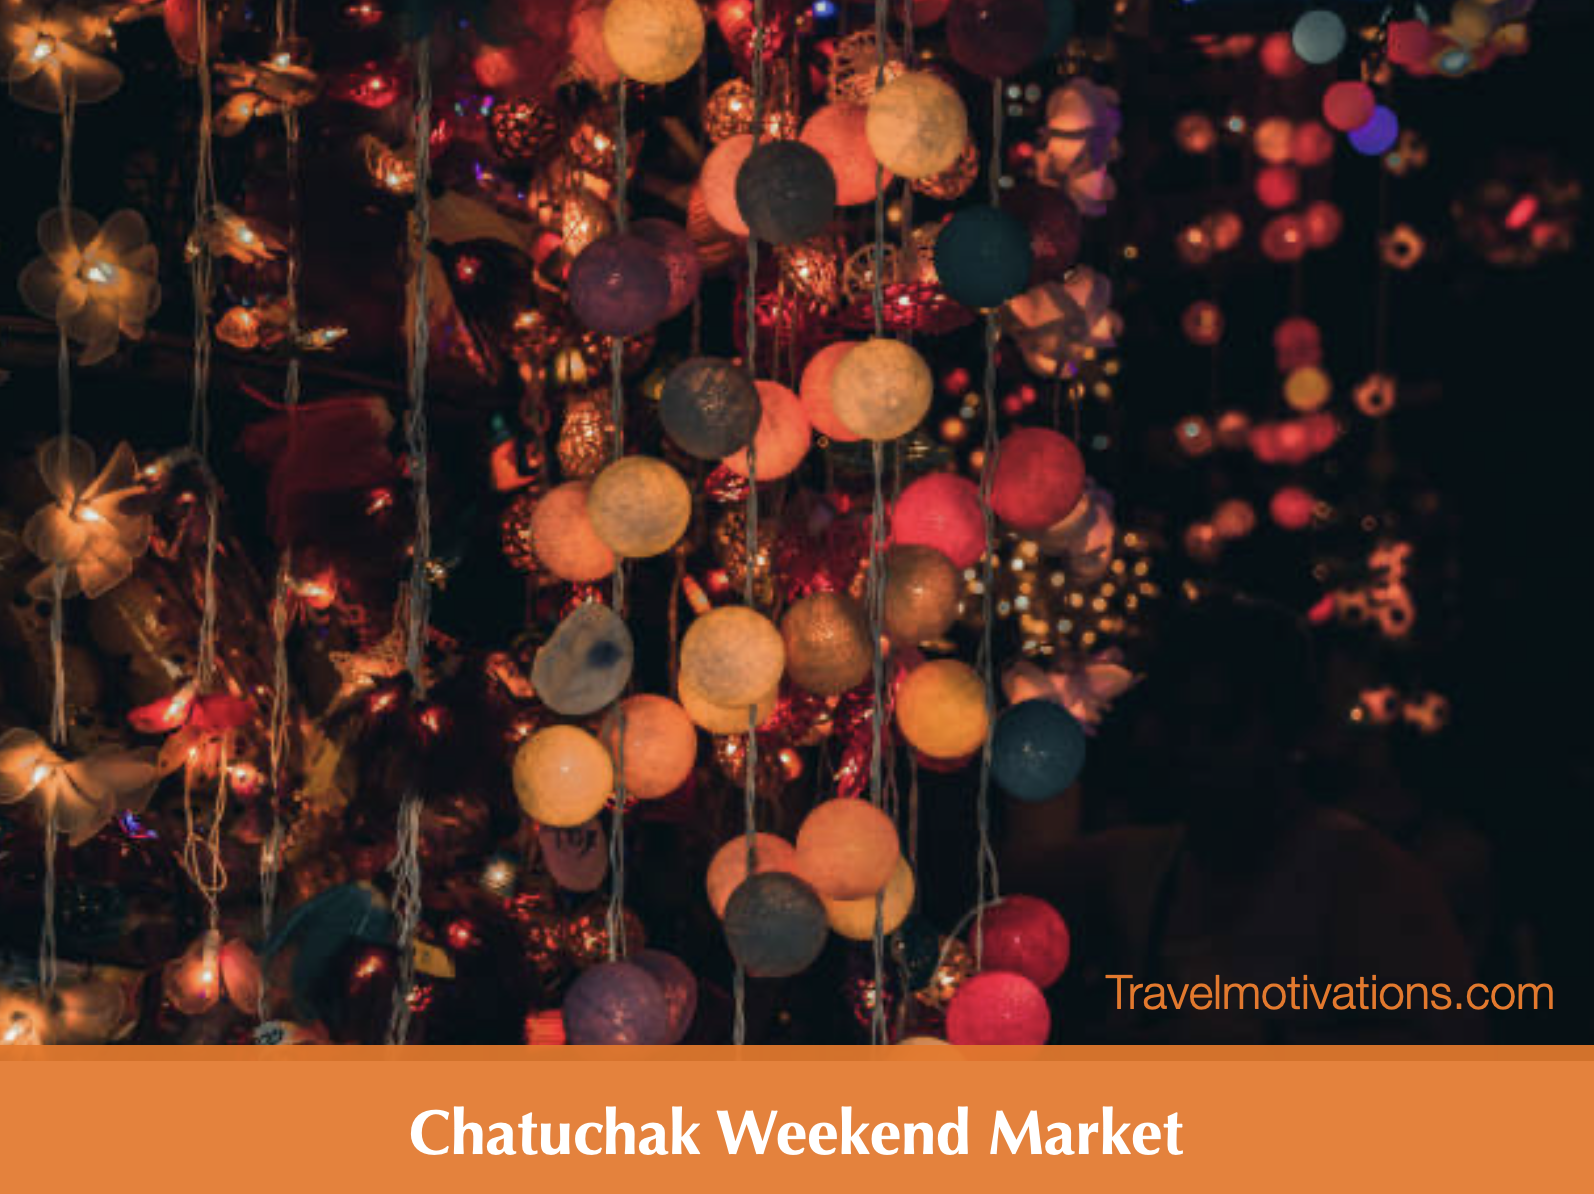 Great Guide to Chatuchak Weekend Market